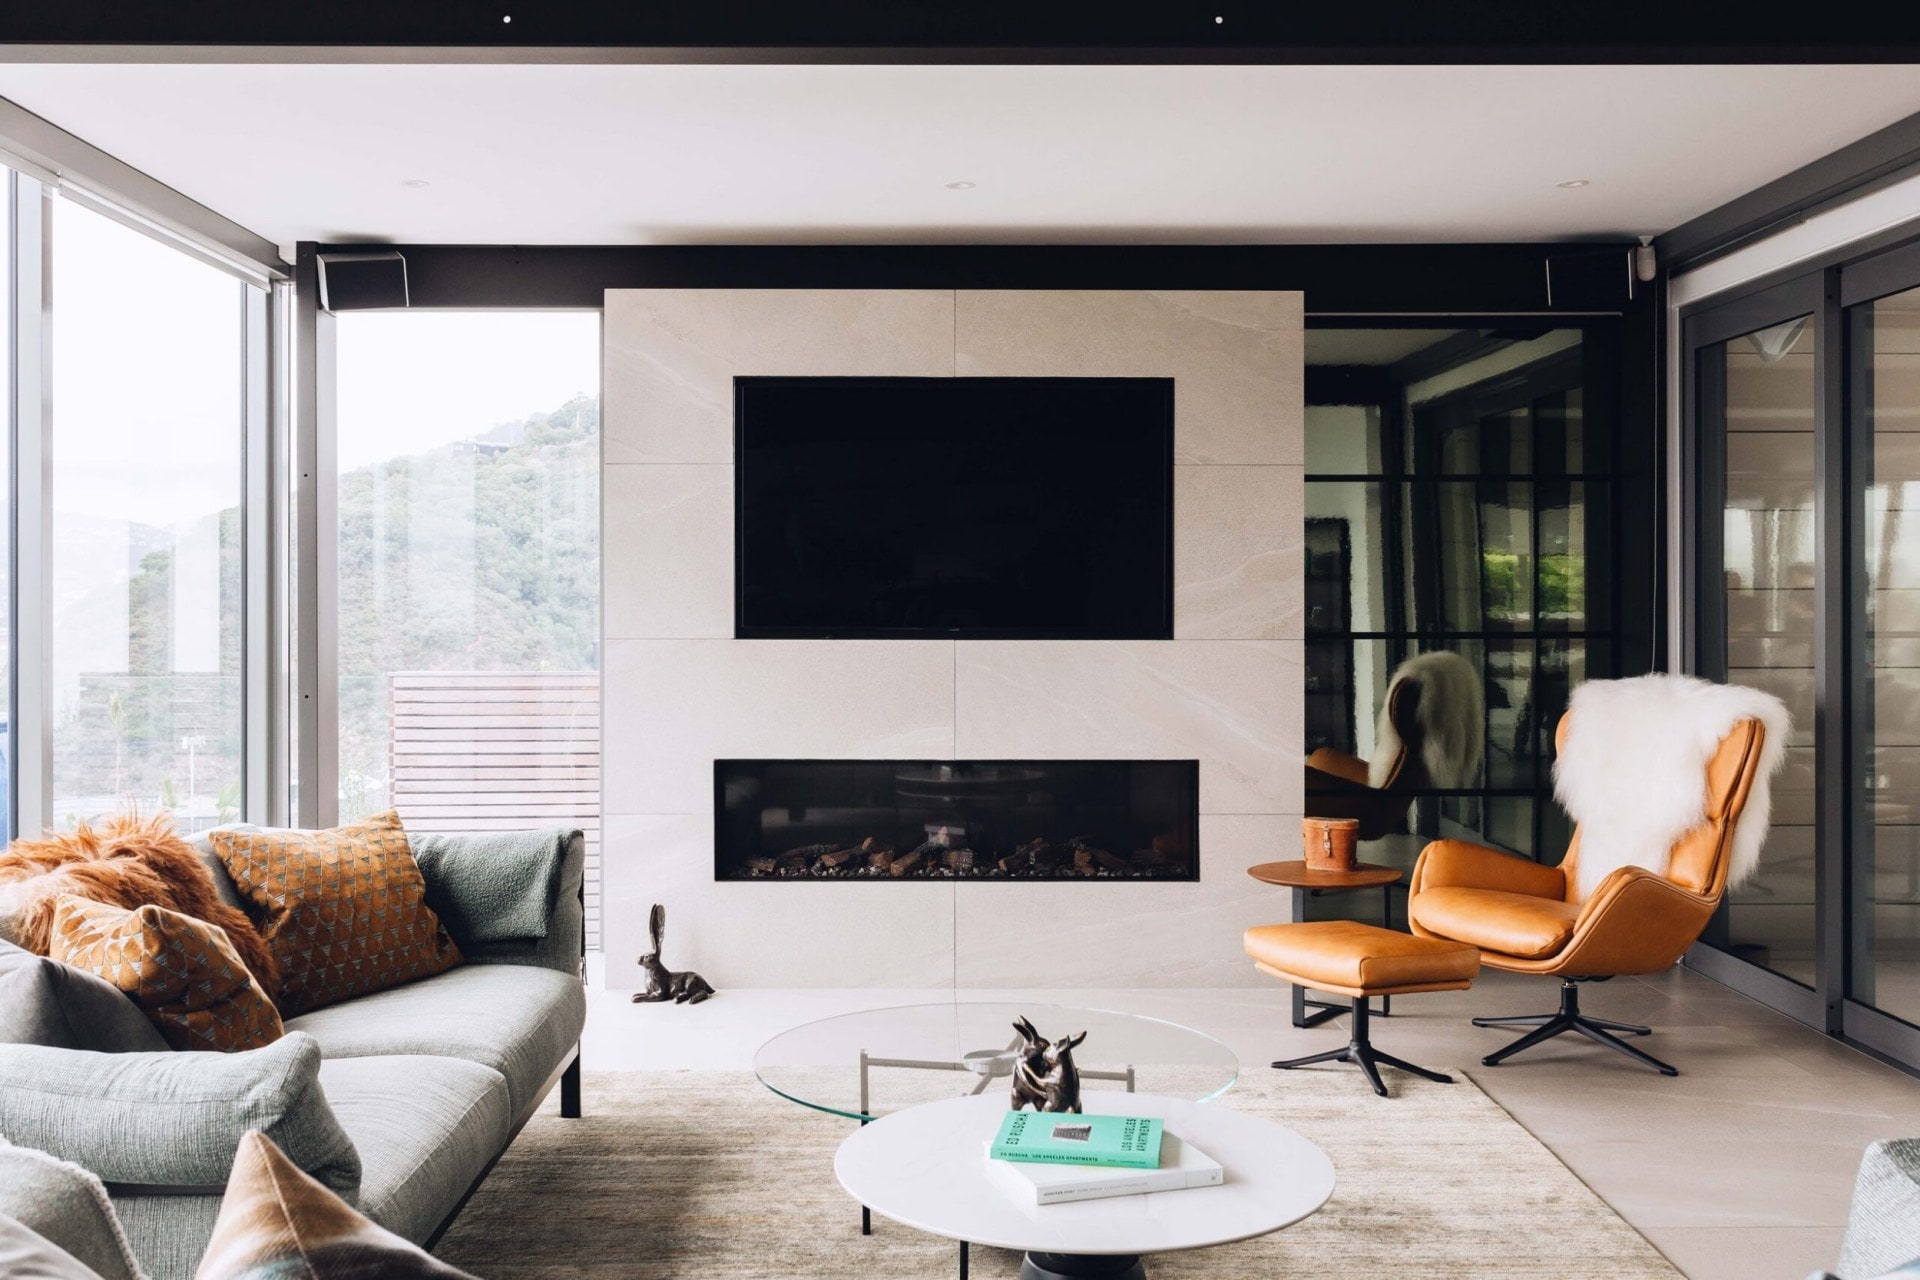 Living room with a grey couch, coral chair, a fireplace and large TV embedded within the wall